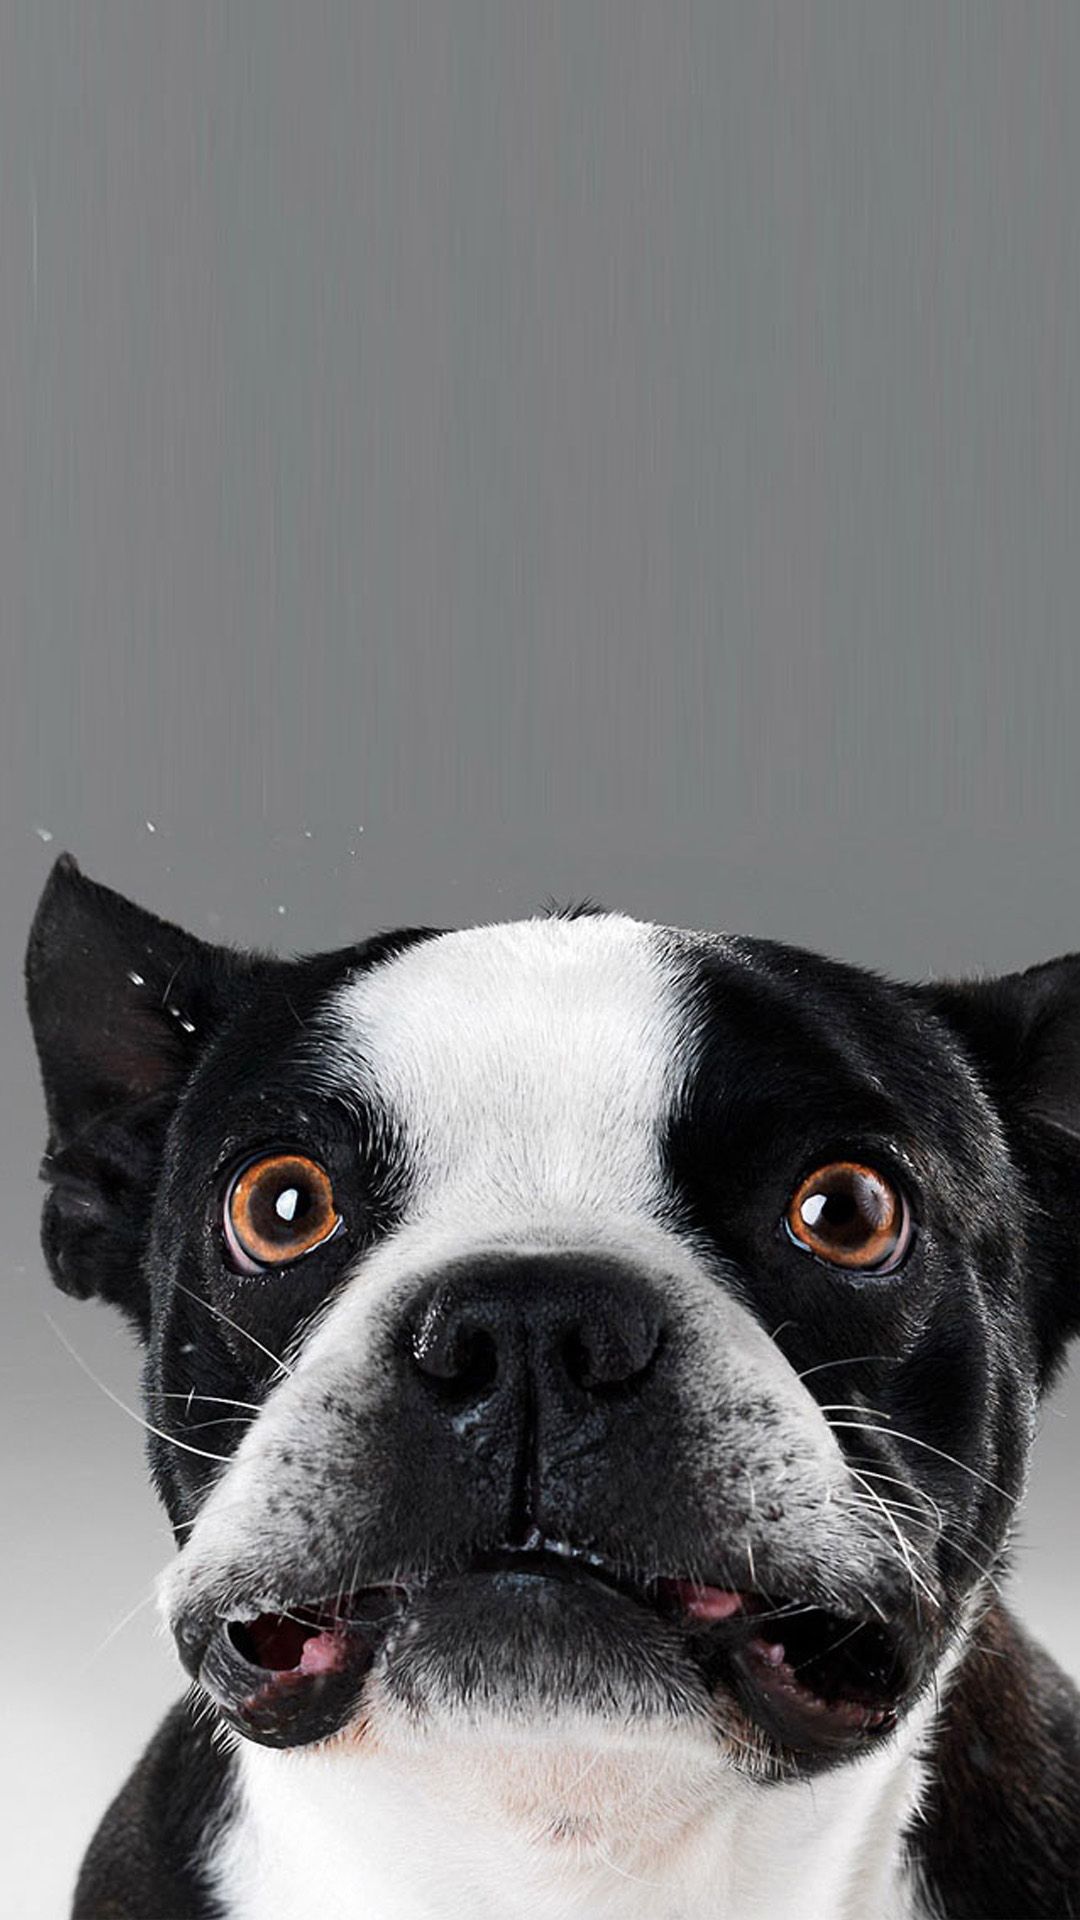 Funny dog faceK wallpaper, free and easy to download